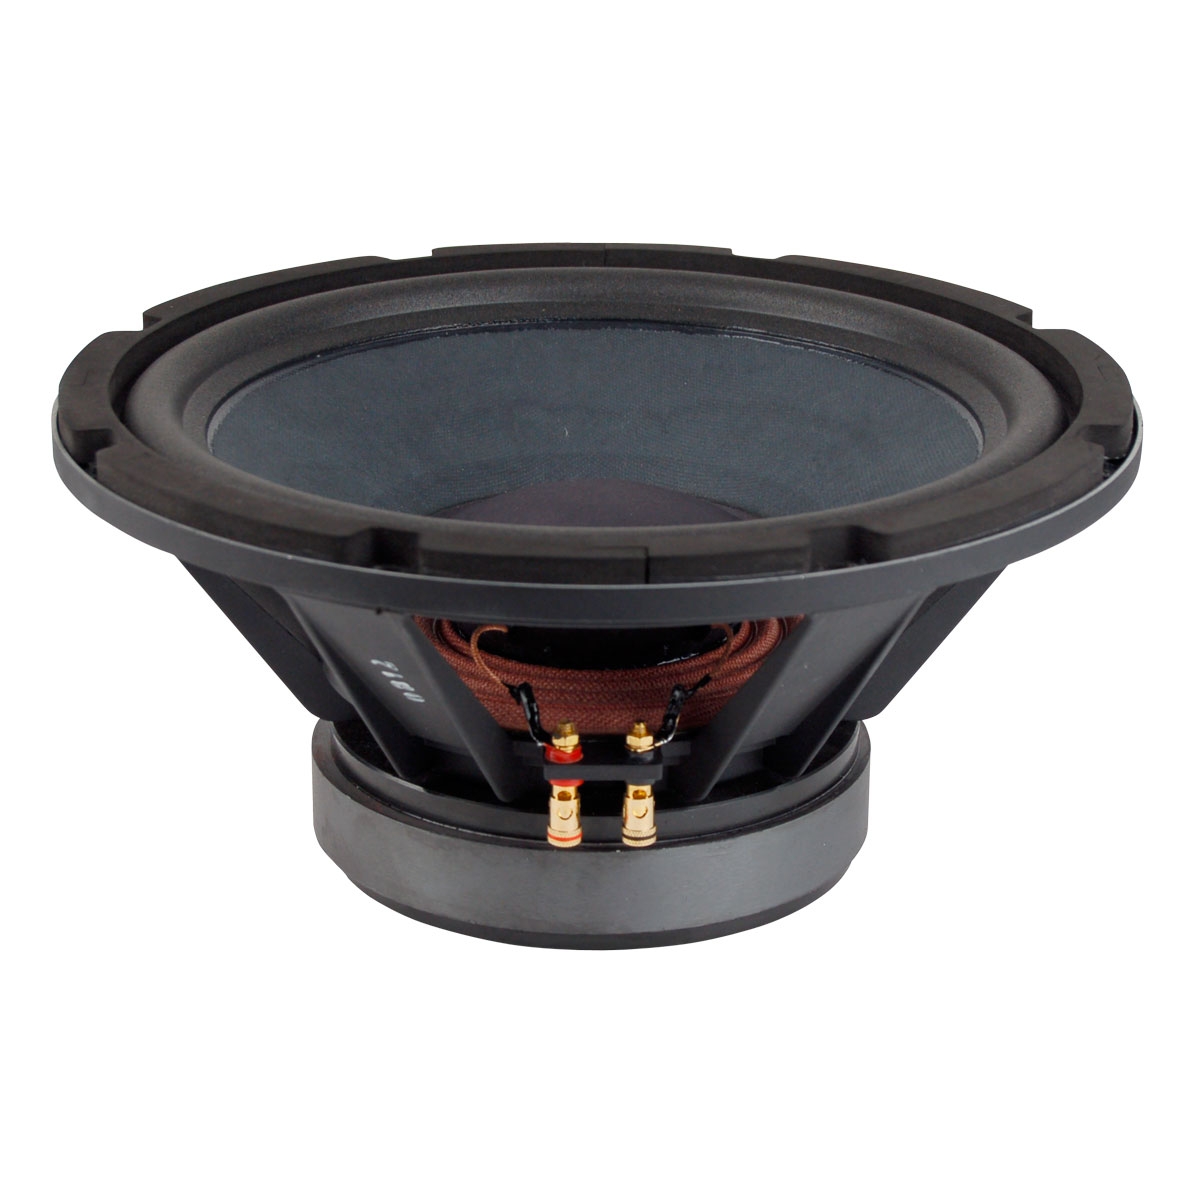 12" 400W boomer for COMPACT subwoofer